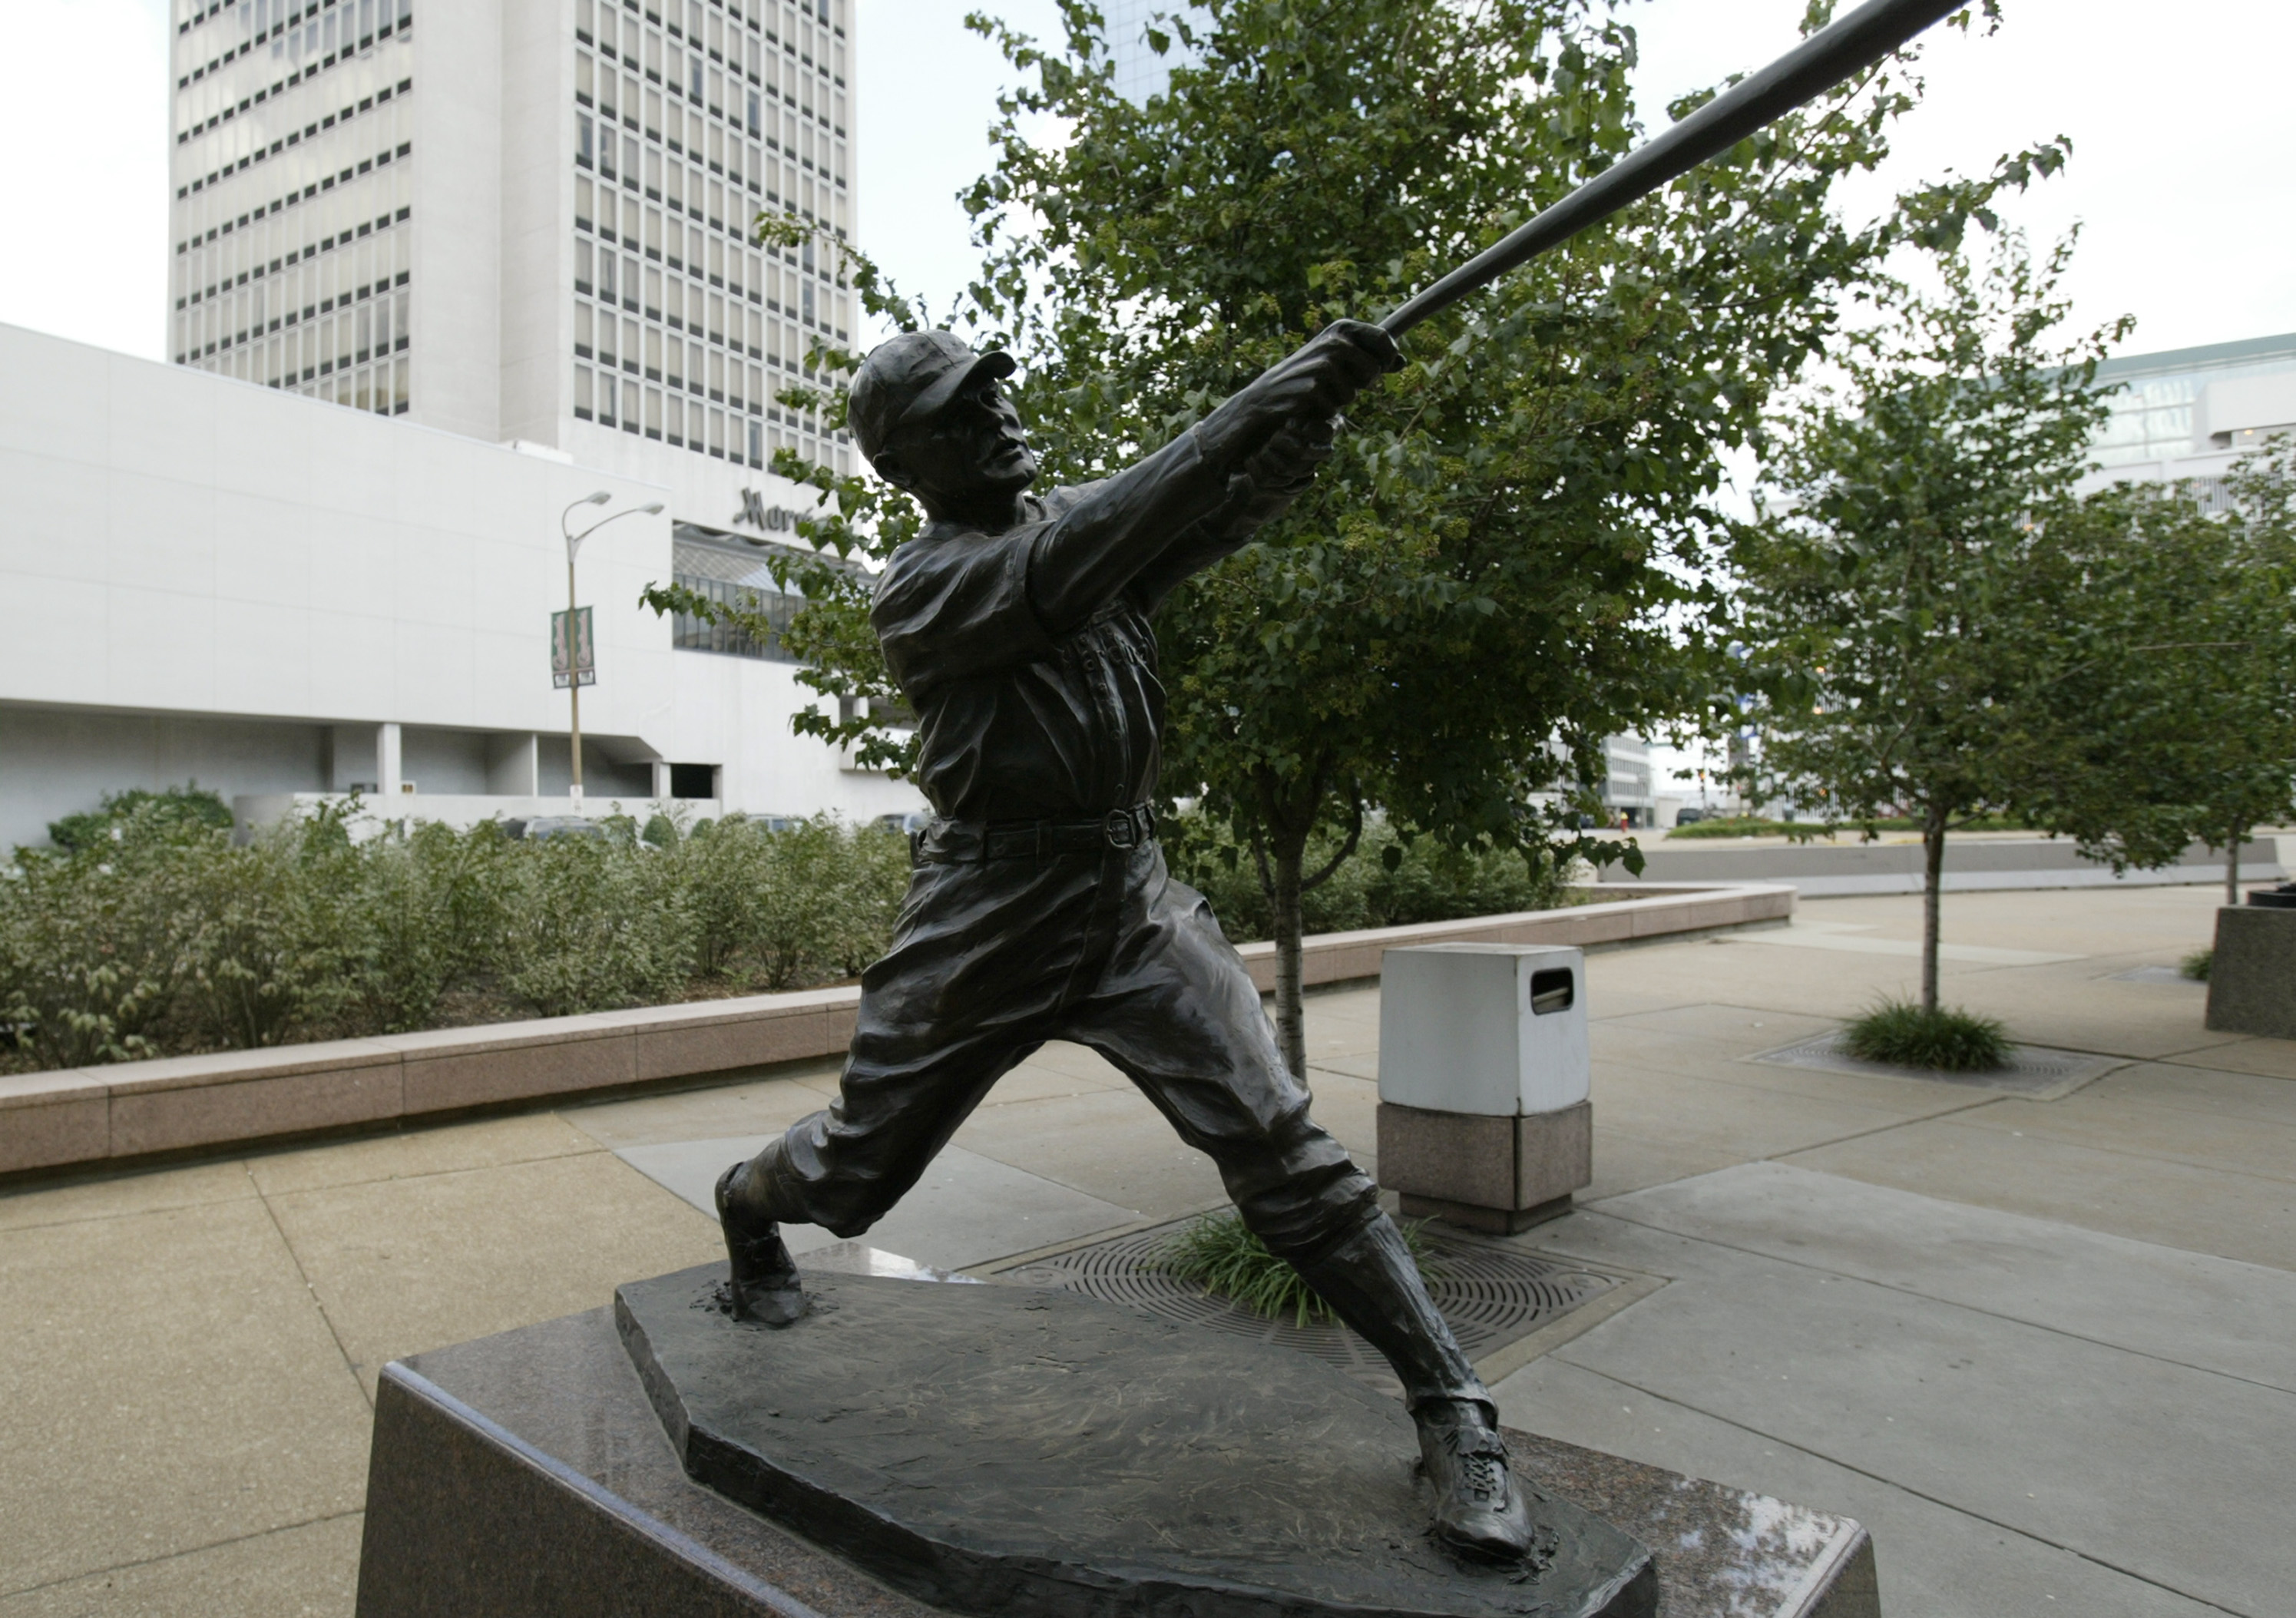 ST LOUIS - JULY 18:  Statue of Rogers Hornsby of the St. Louis Cardinals is outside of Busch Stadium on July 18, 2004 in St. Louis, Missouri. (Photo by Dilip Vishwanat/Getty Images)